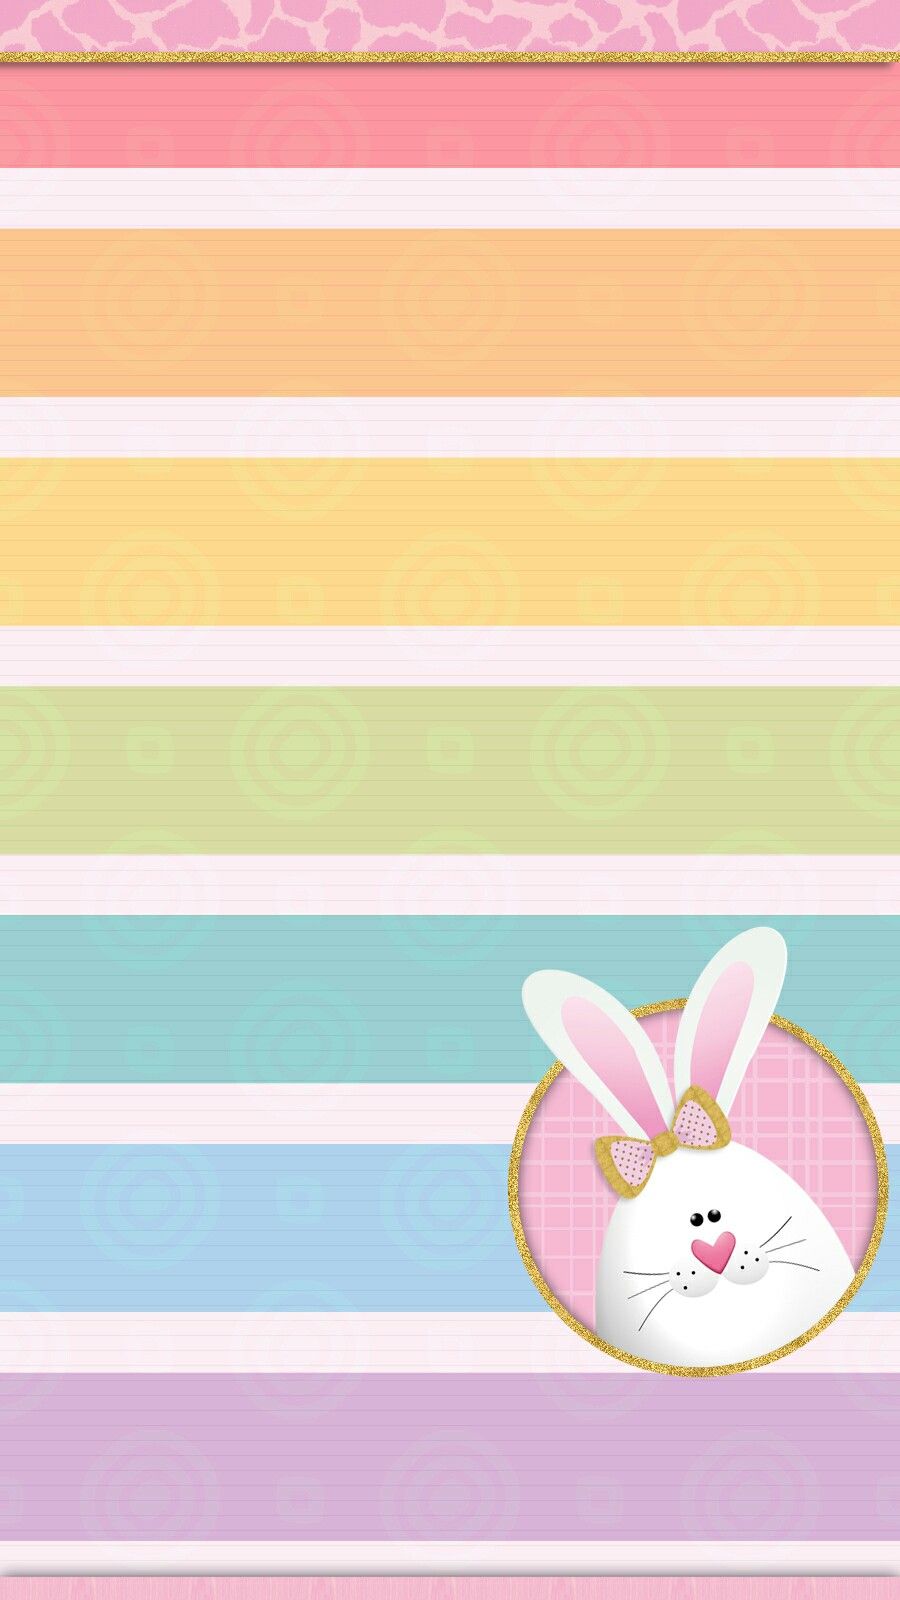 Easter bunny wallpaper iphone. Easter wallpaper, Happy easter